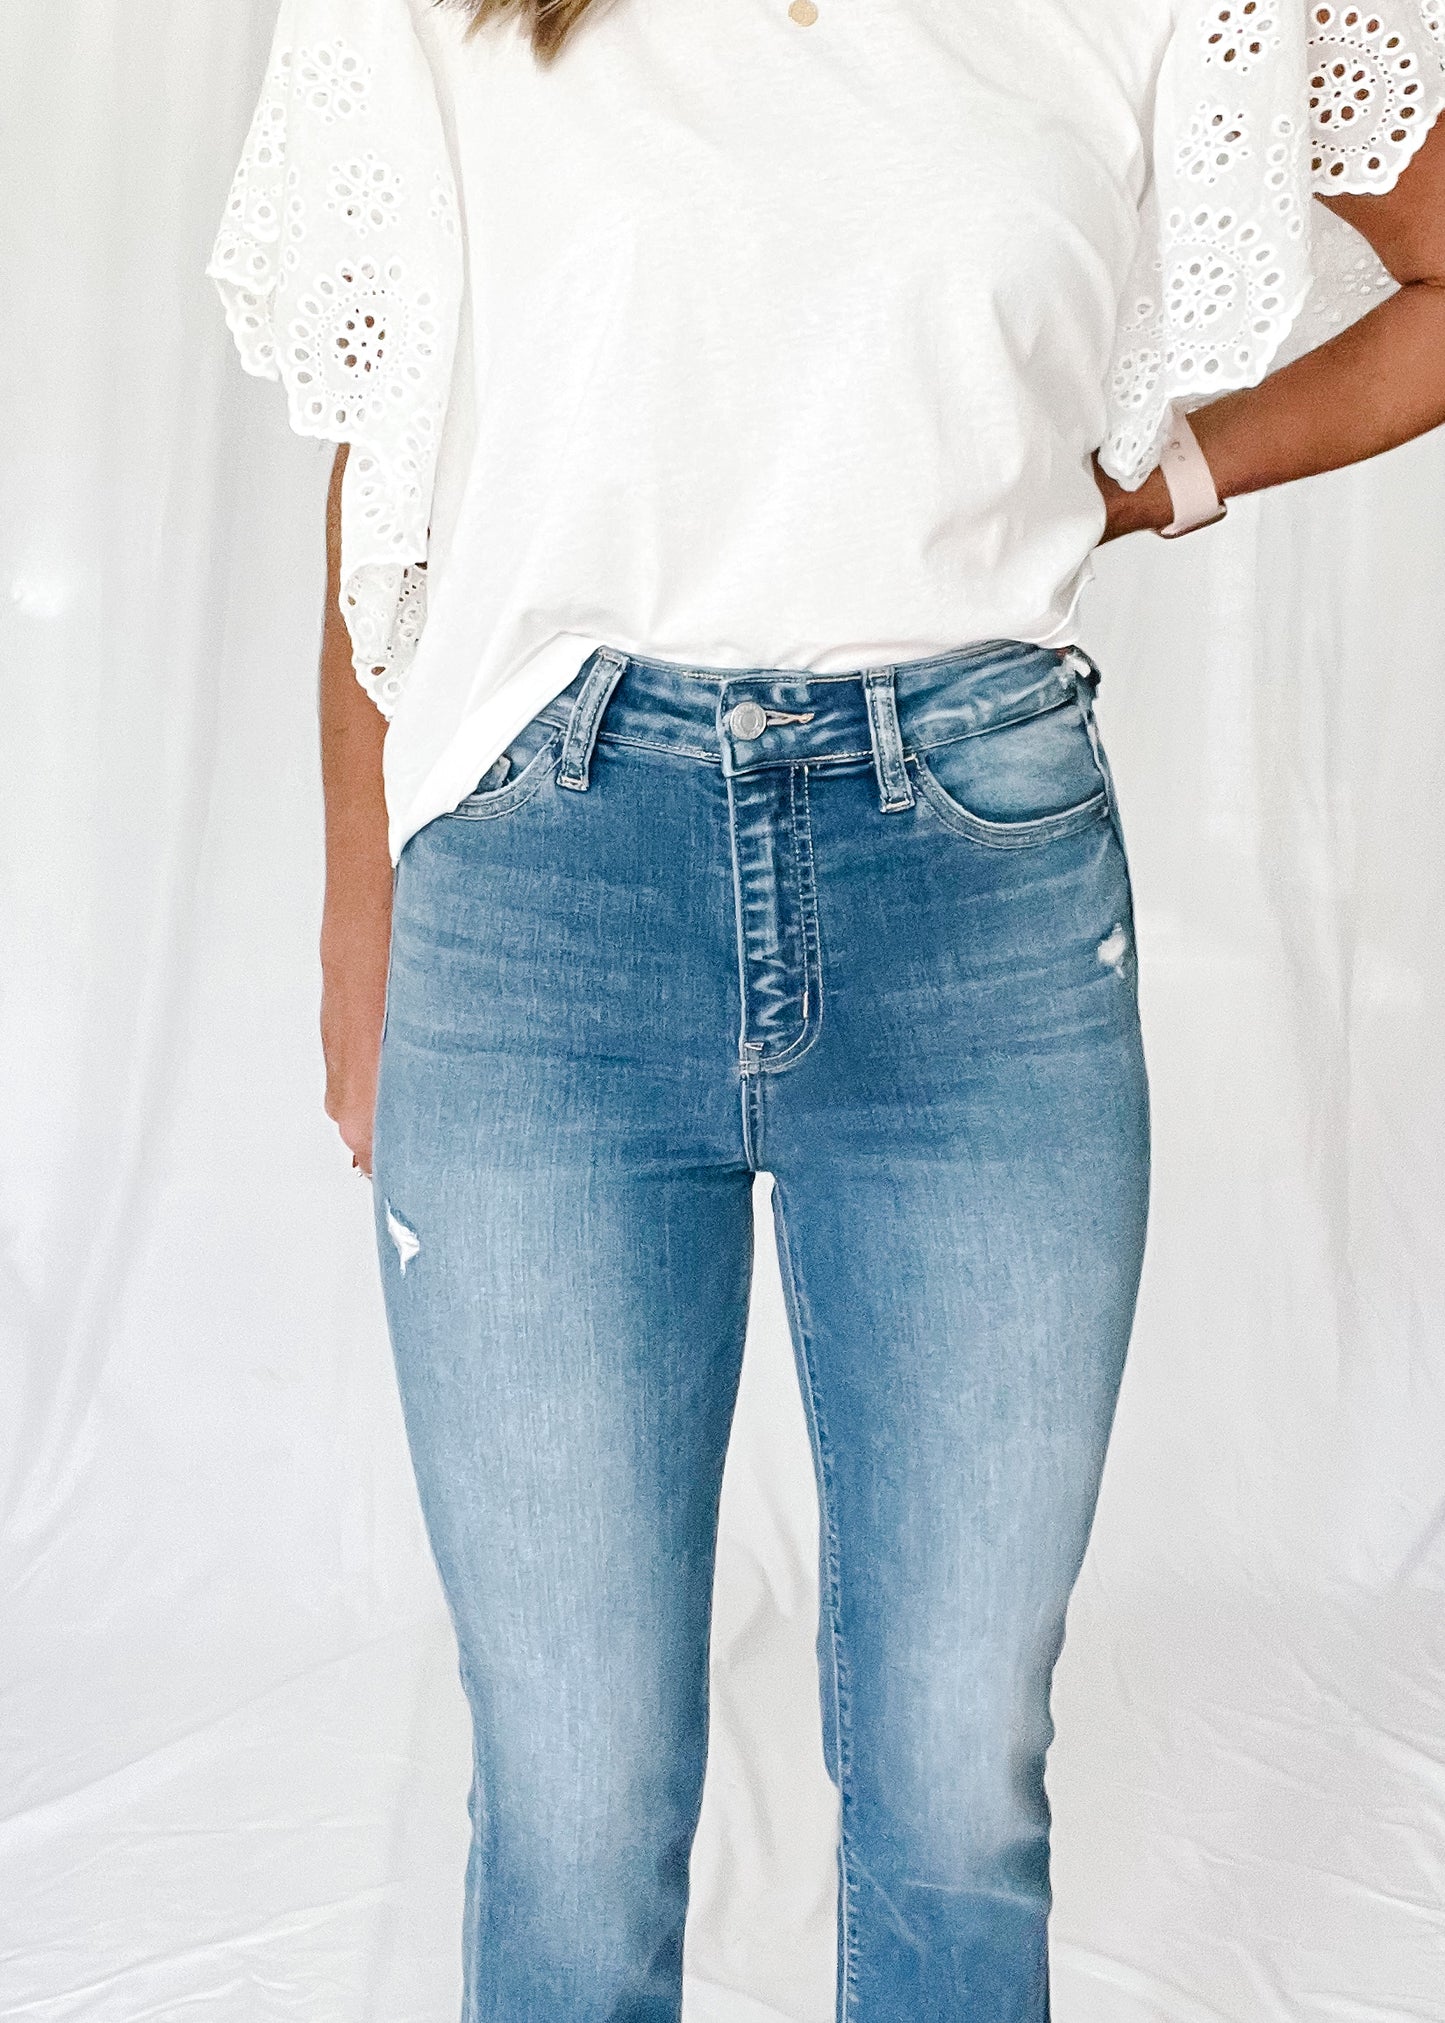 The Best Day Straight Leg Jeans